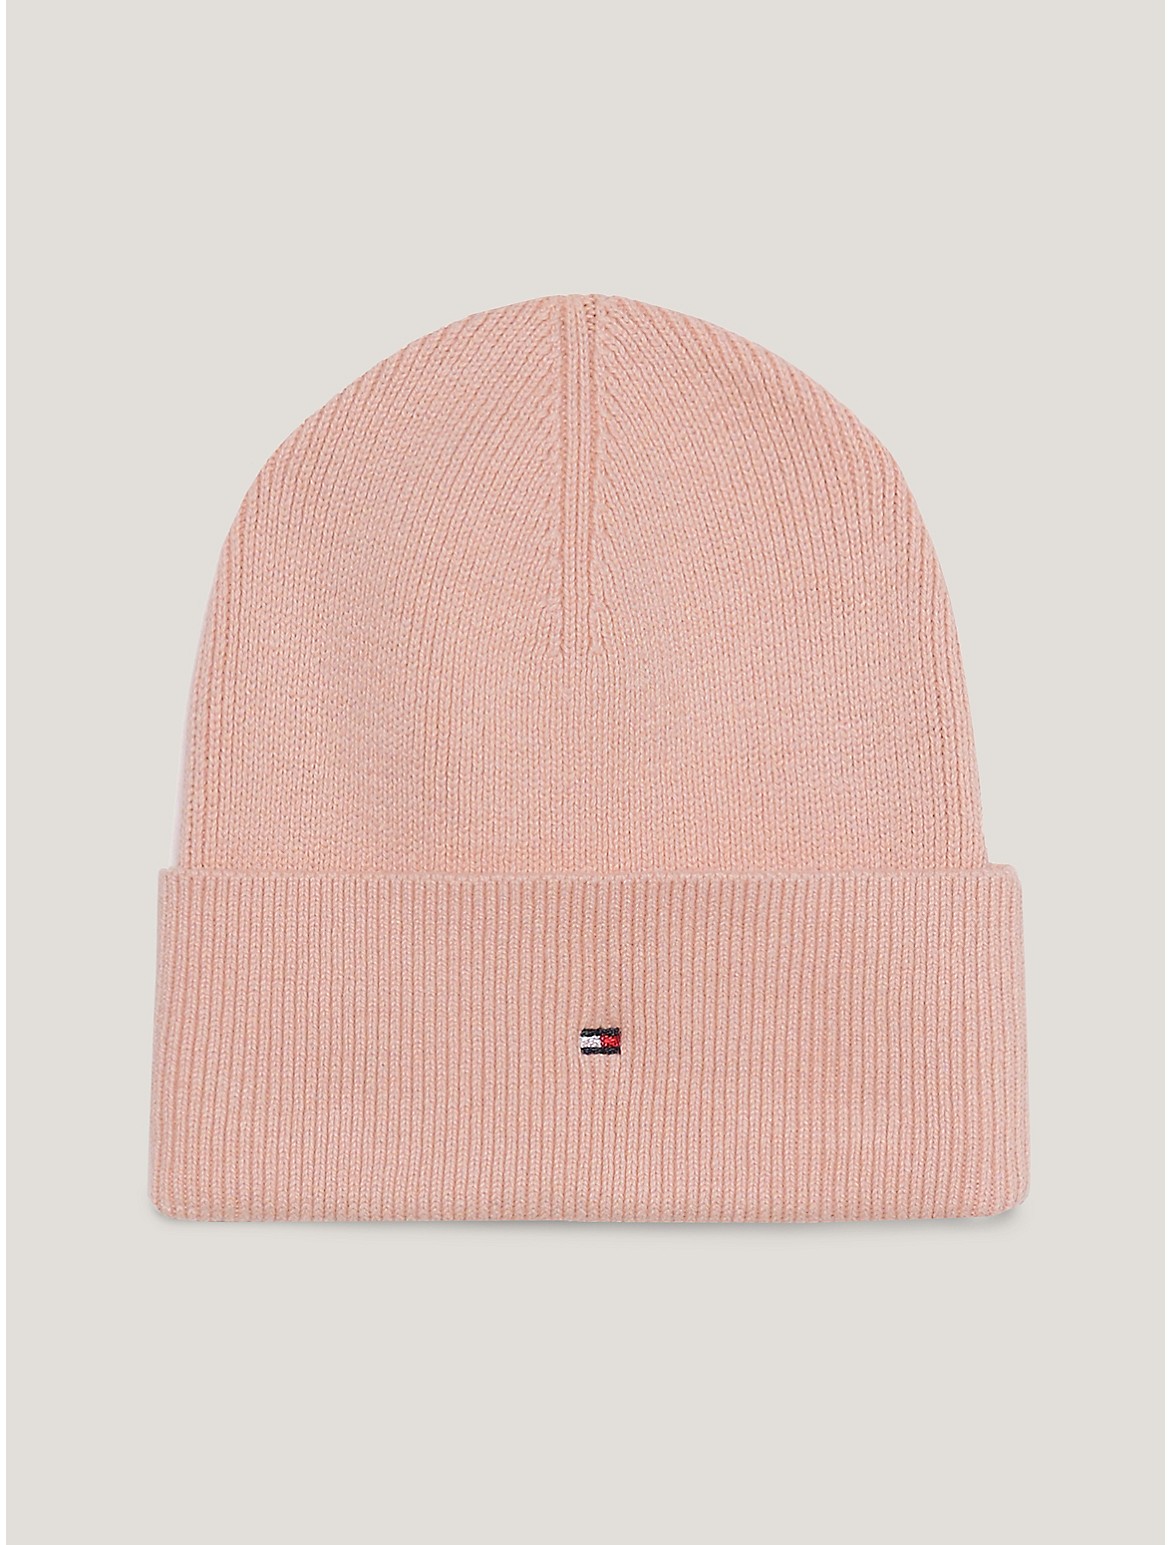 Tommy Hilfiger Women's Flag Logo Cotton and Cashmere Beanie - Pink